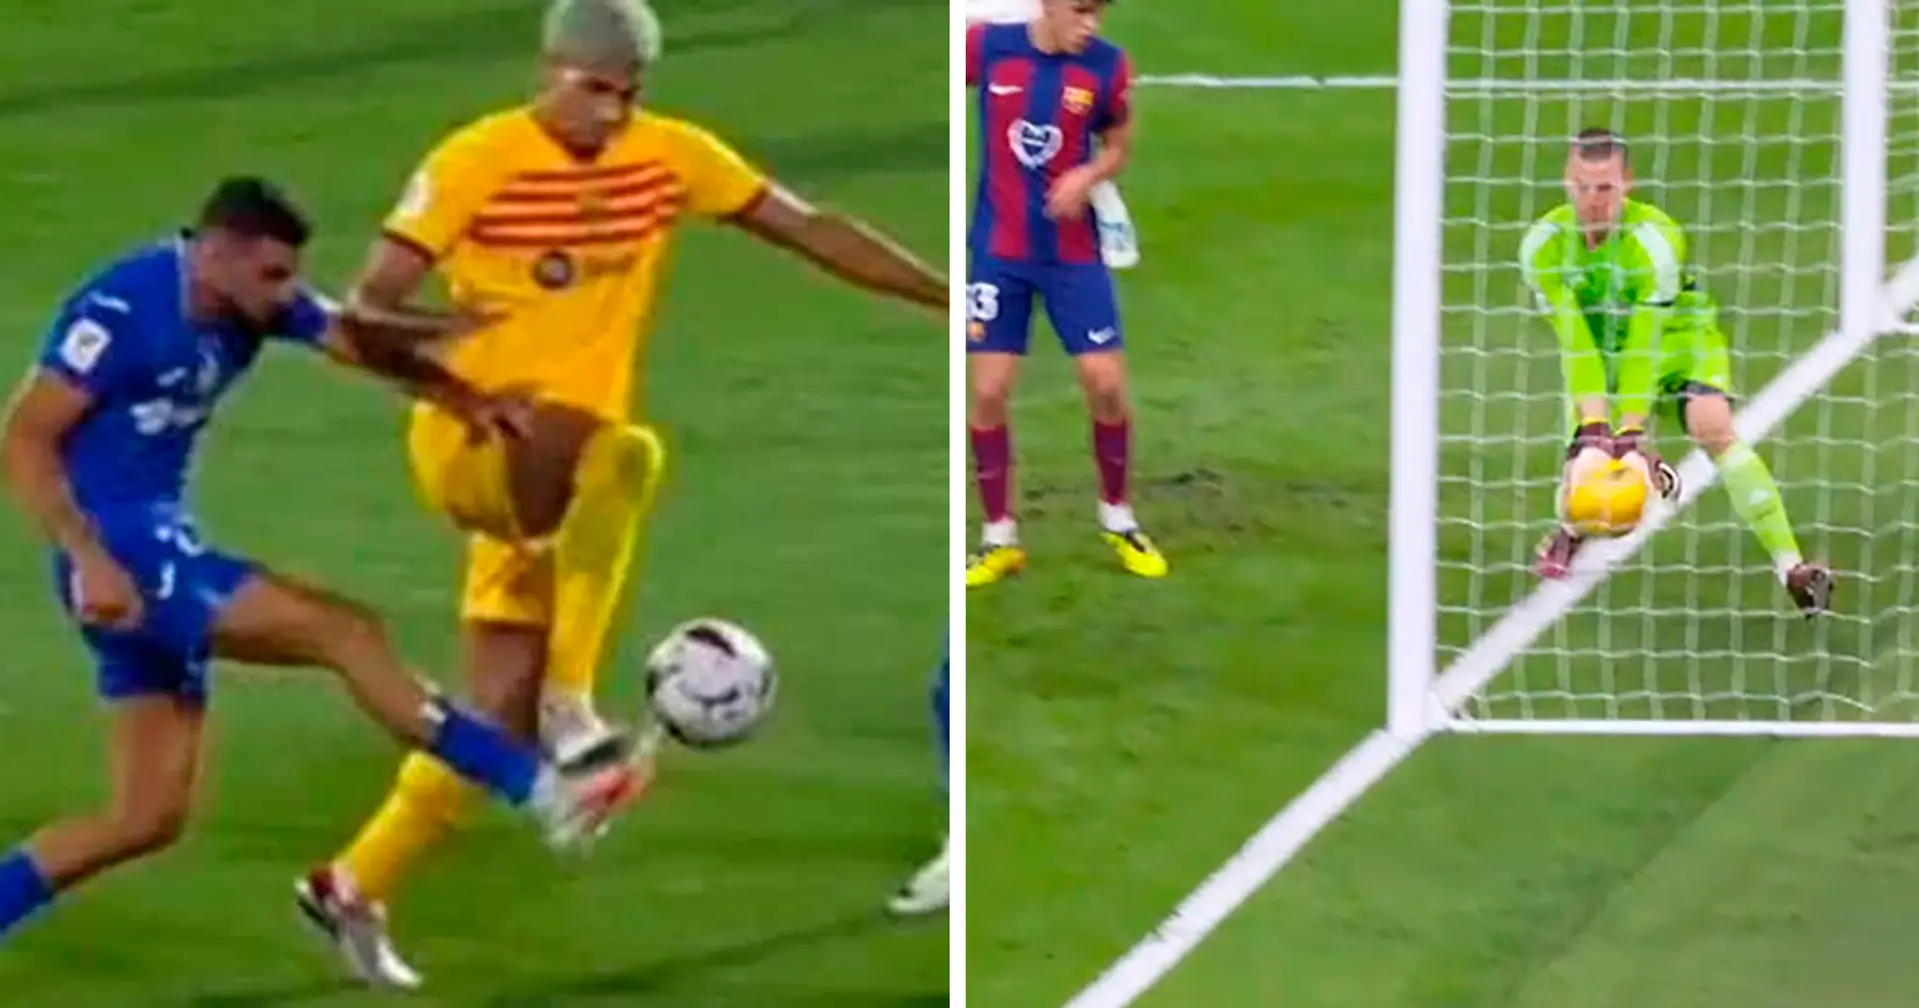 Revealed: how many points did Barca lose because of the refereeing errors this season